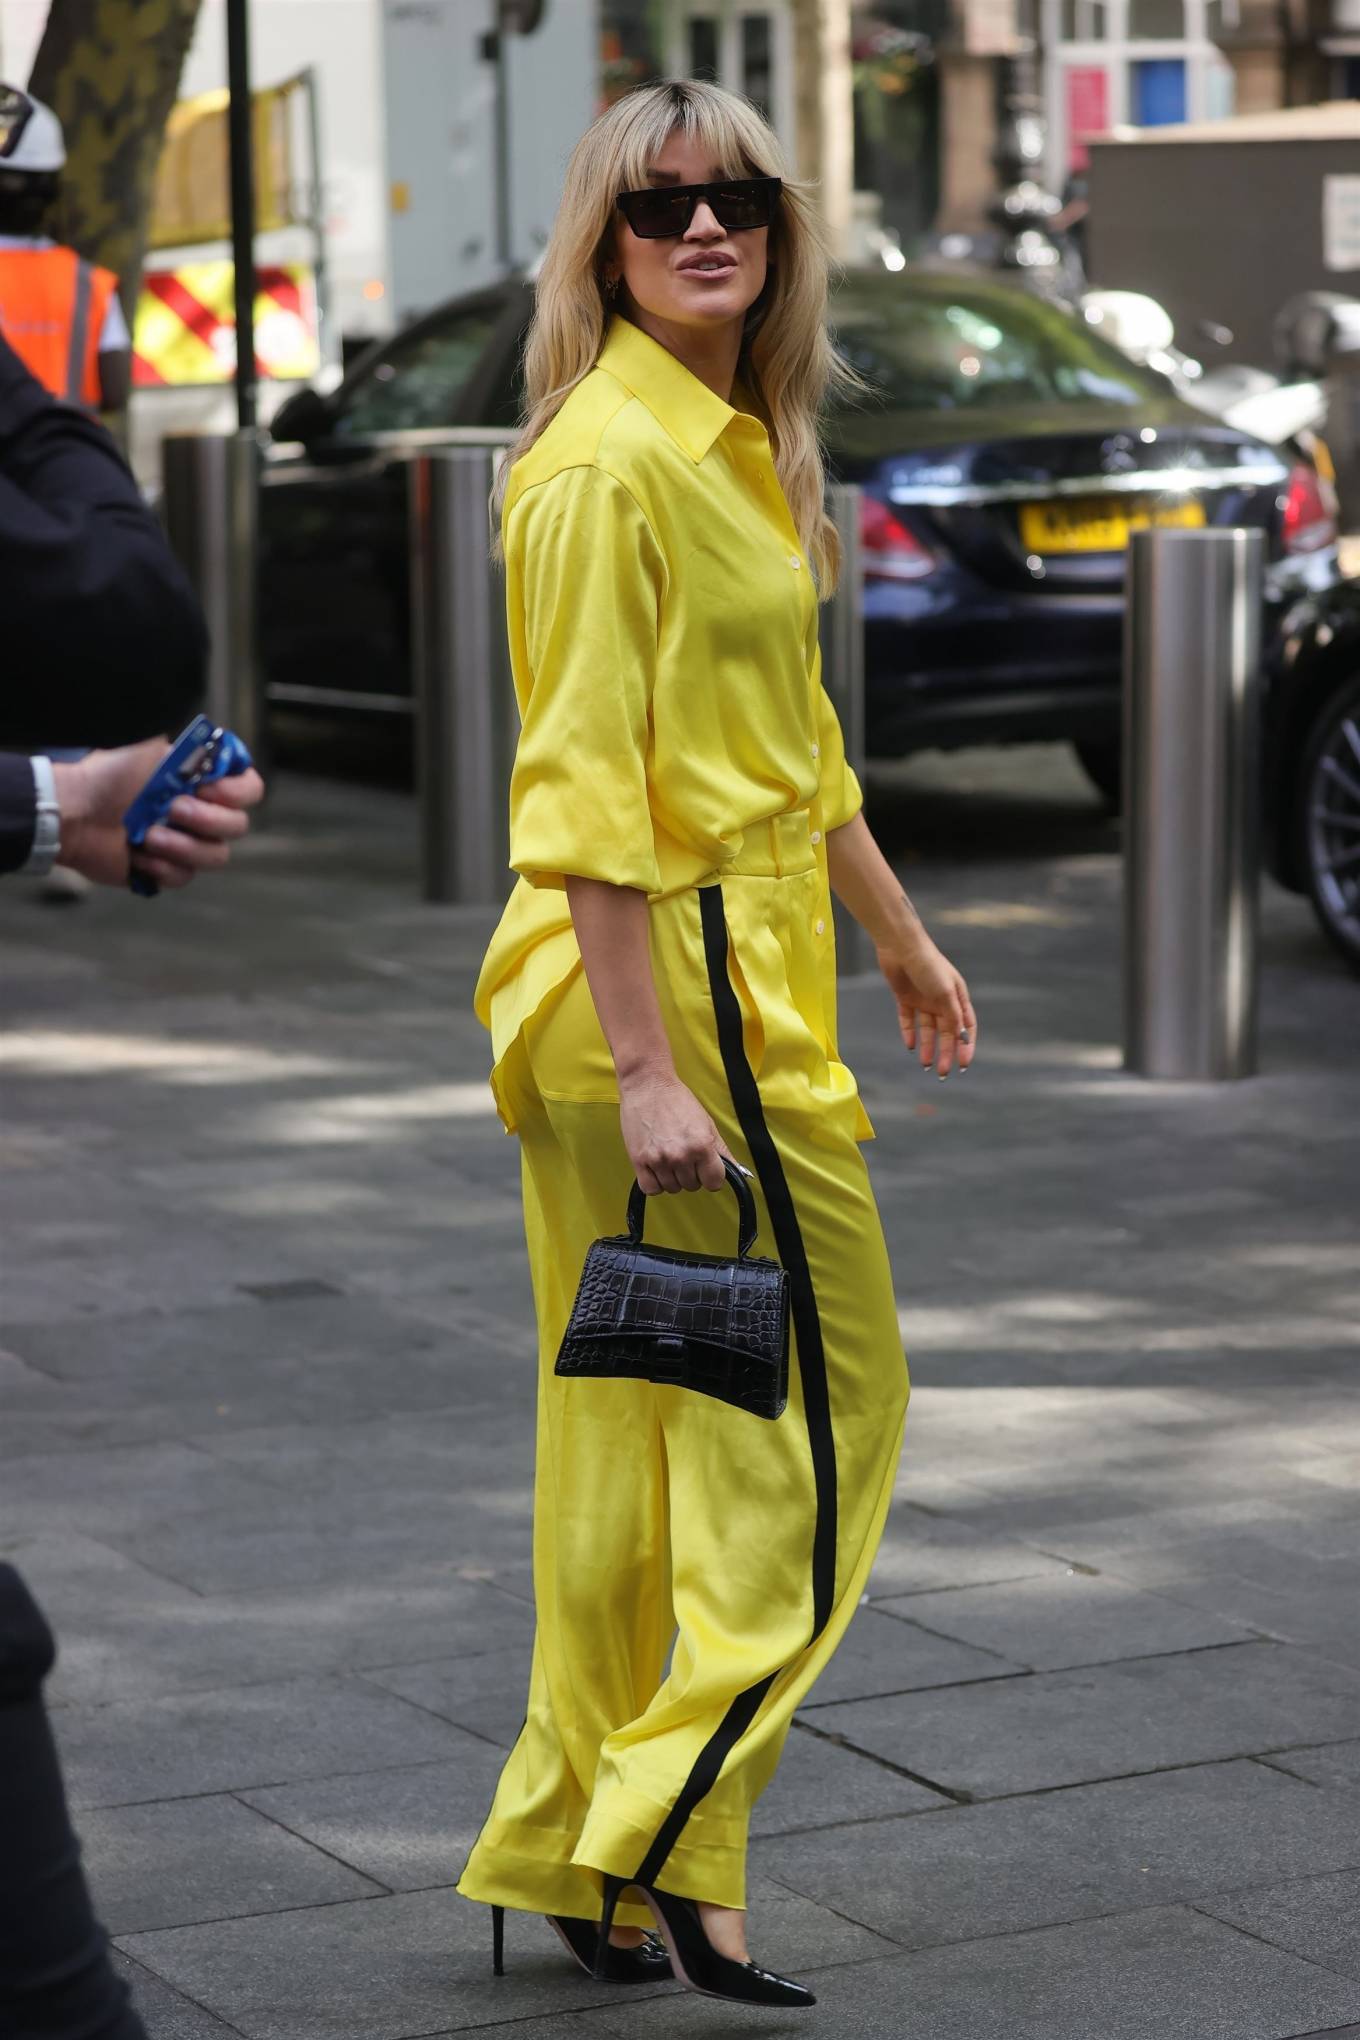 Ashley Roberts - Seen in yellow outfit at Heart radio in London